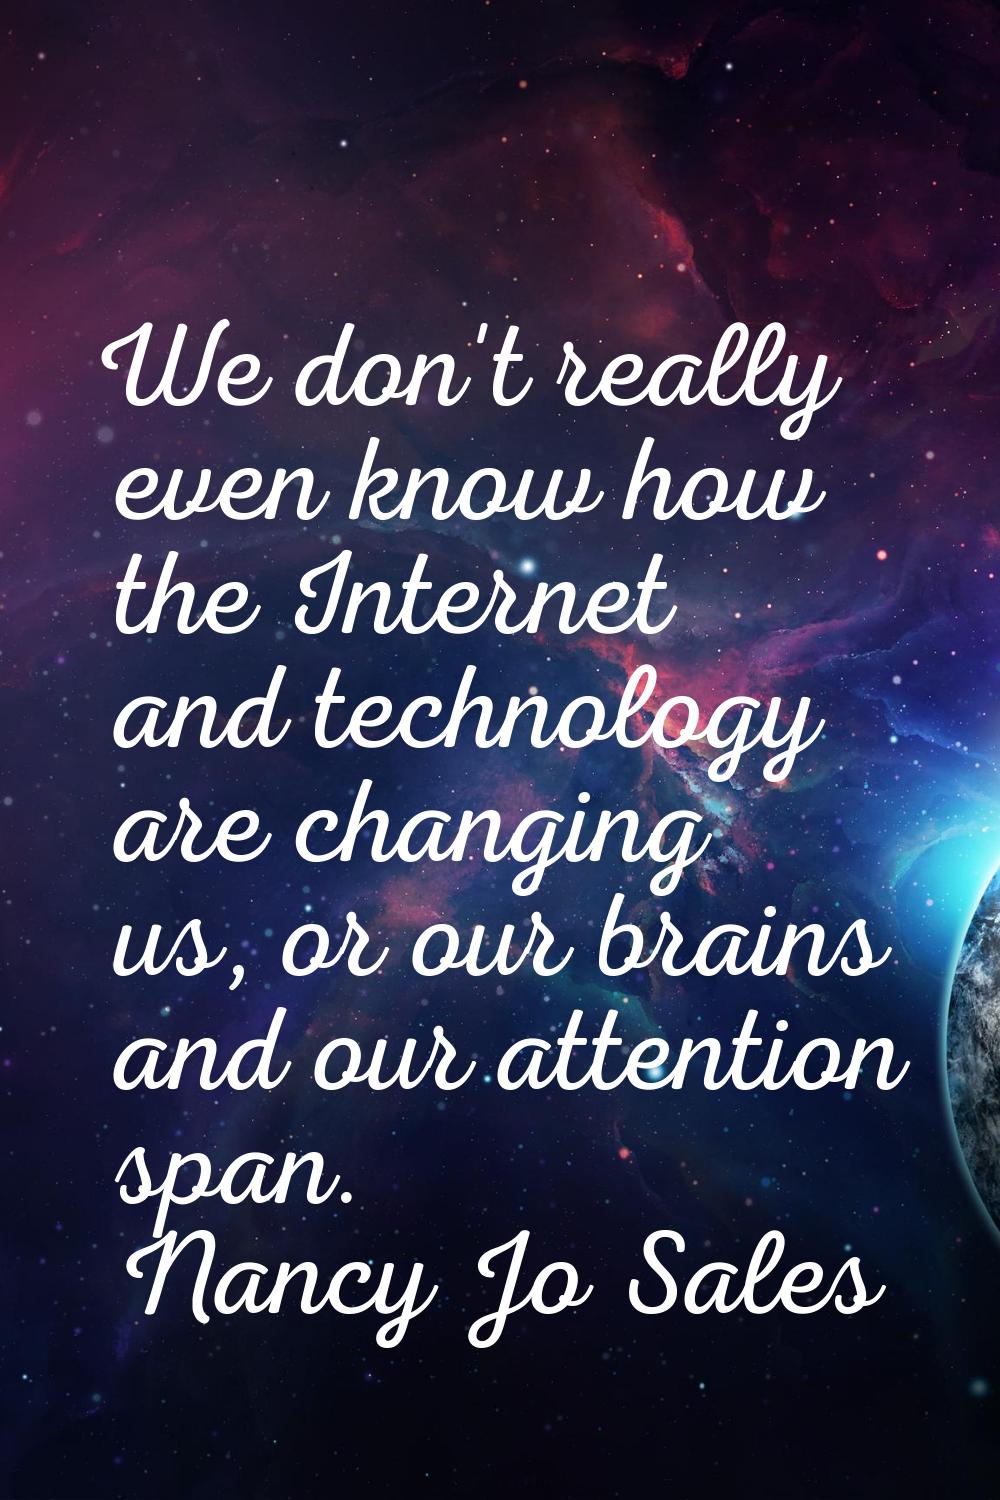 We don't really even know how the Internet and technology are changing us, or our brains and our at